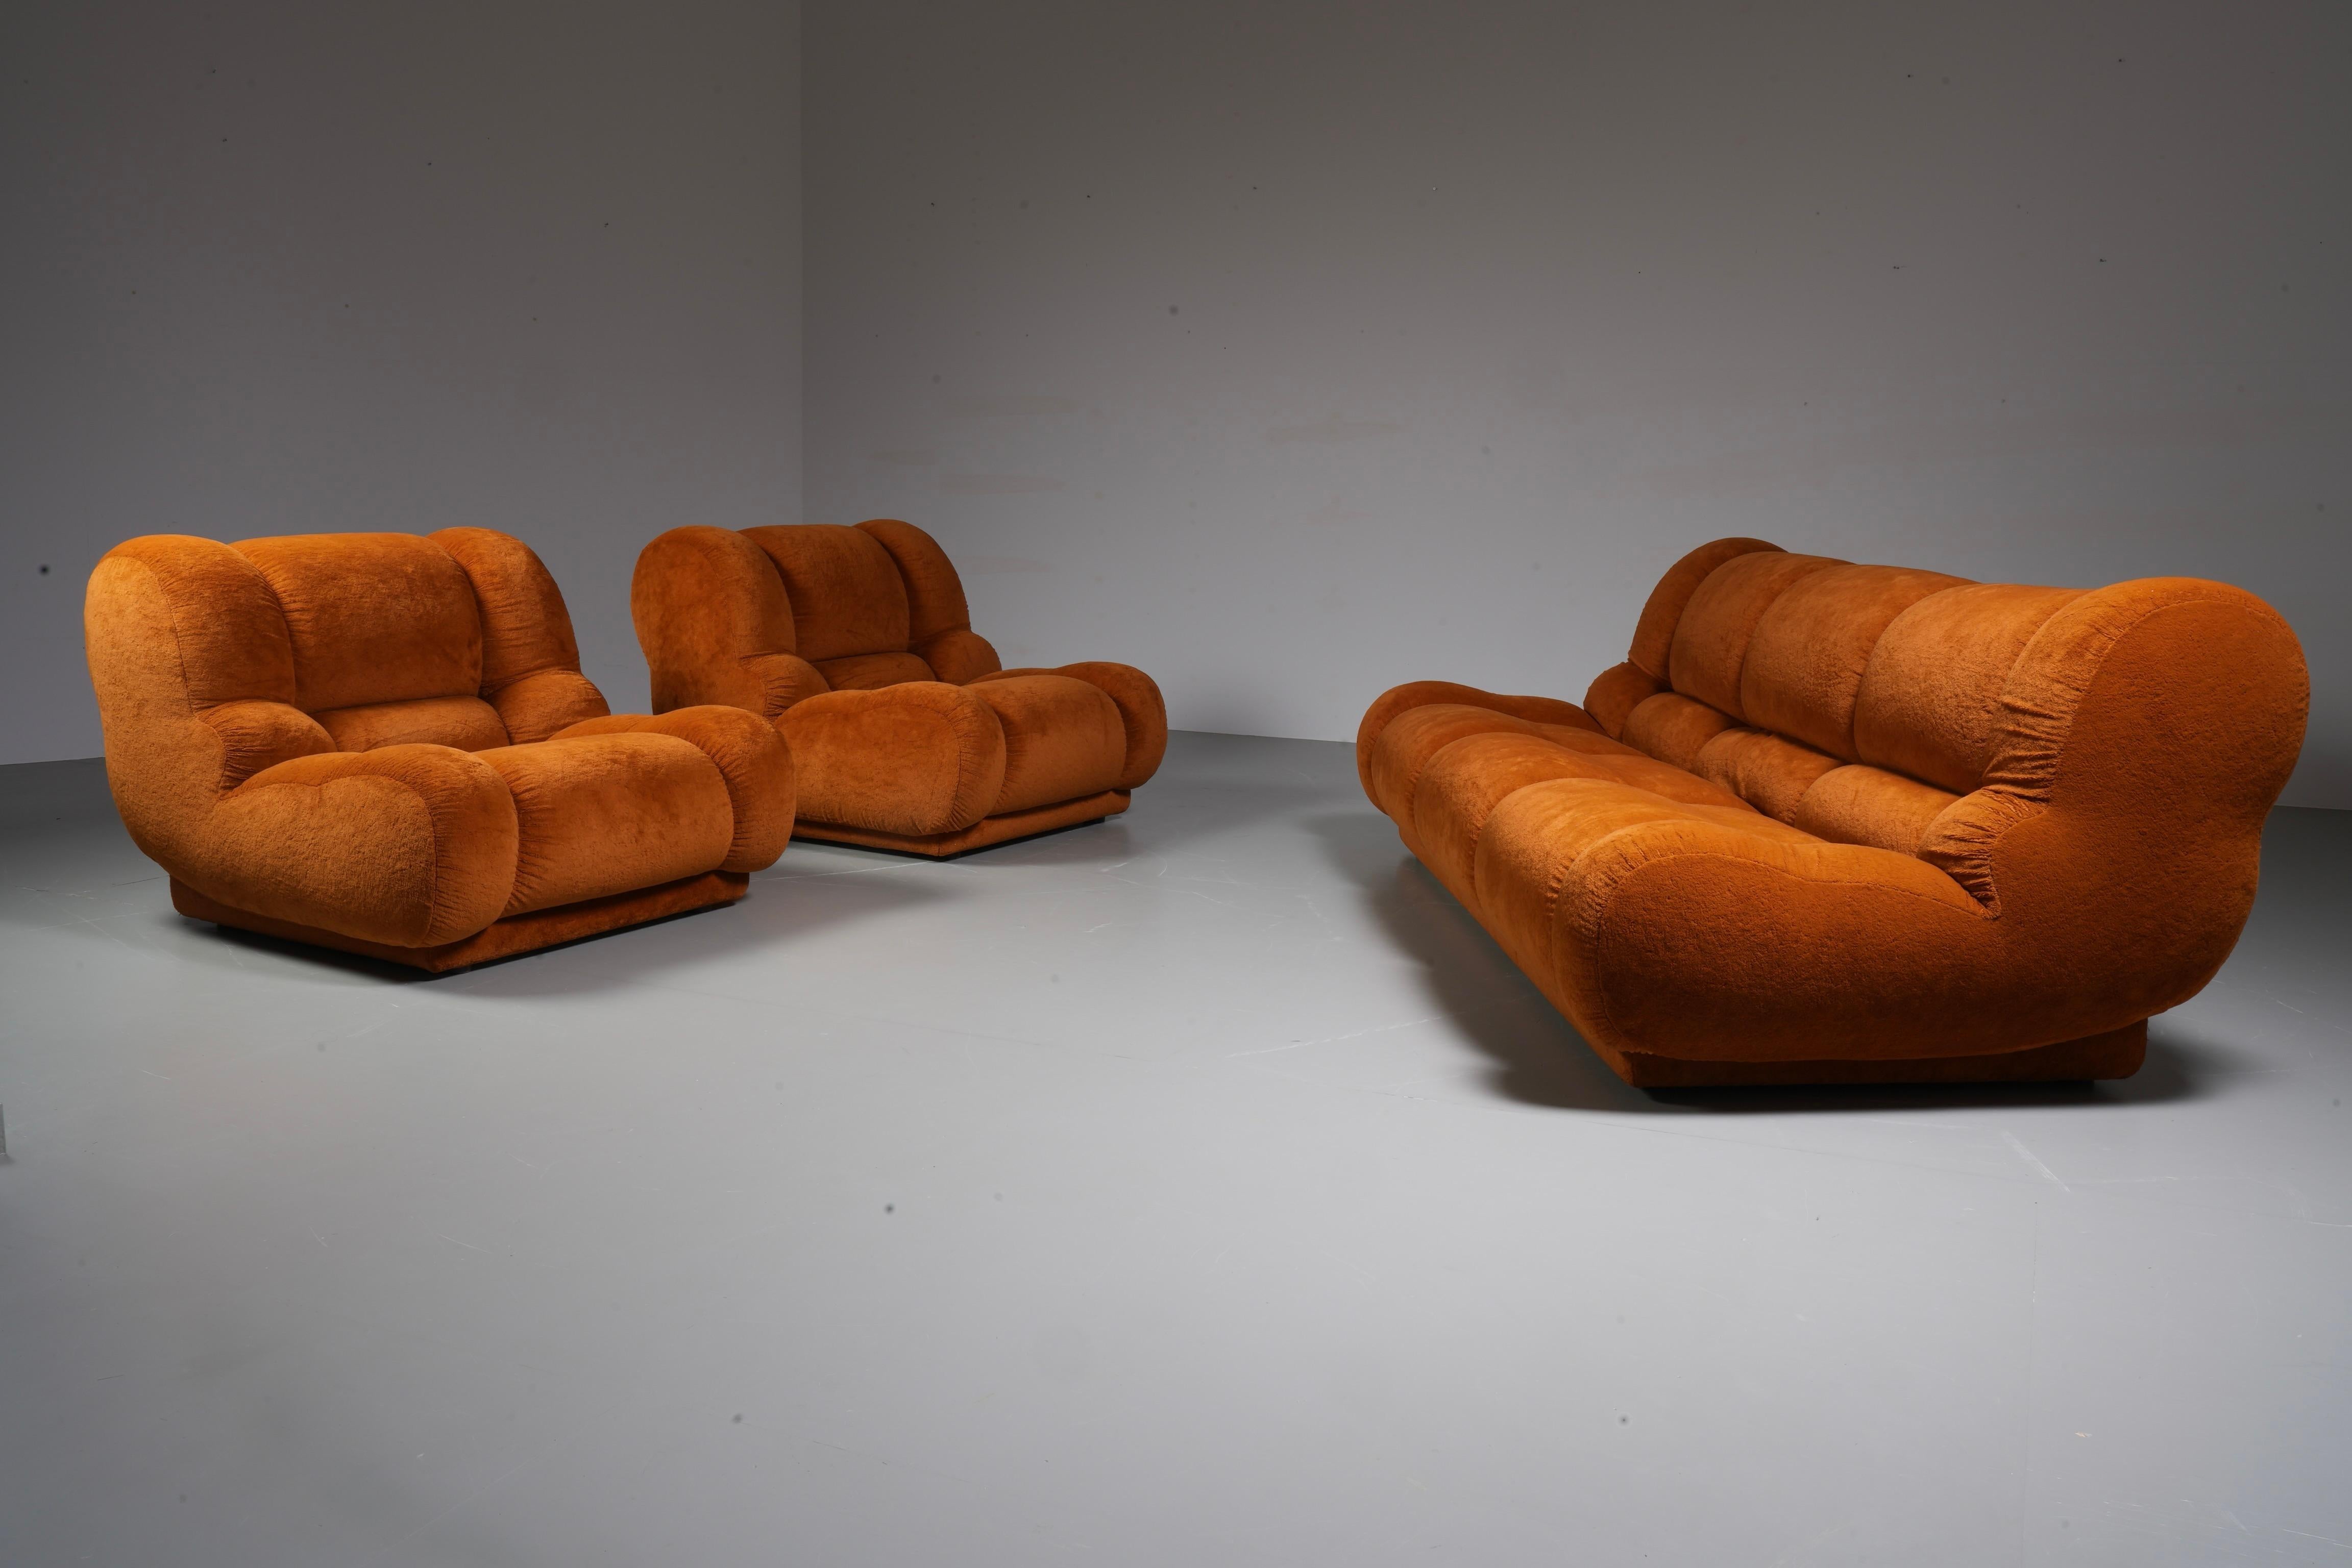 Amazing living room set in very well preserved orange / rusty brown velvet upholstery. What stands out are the quality of the upholstery: thick pluche velvet. Of course the Italians are well known for their skills in regards to fashion manufacturing